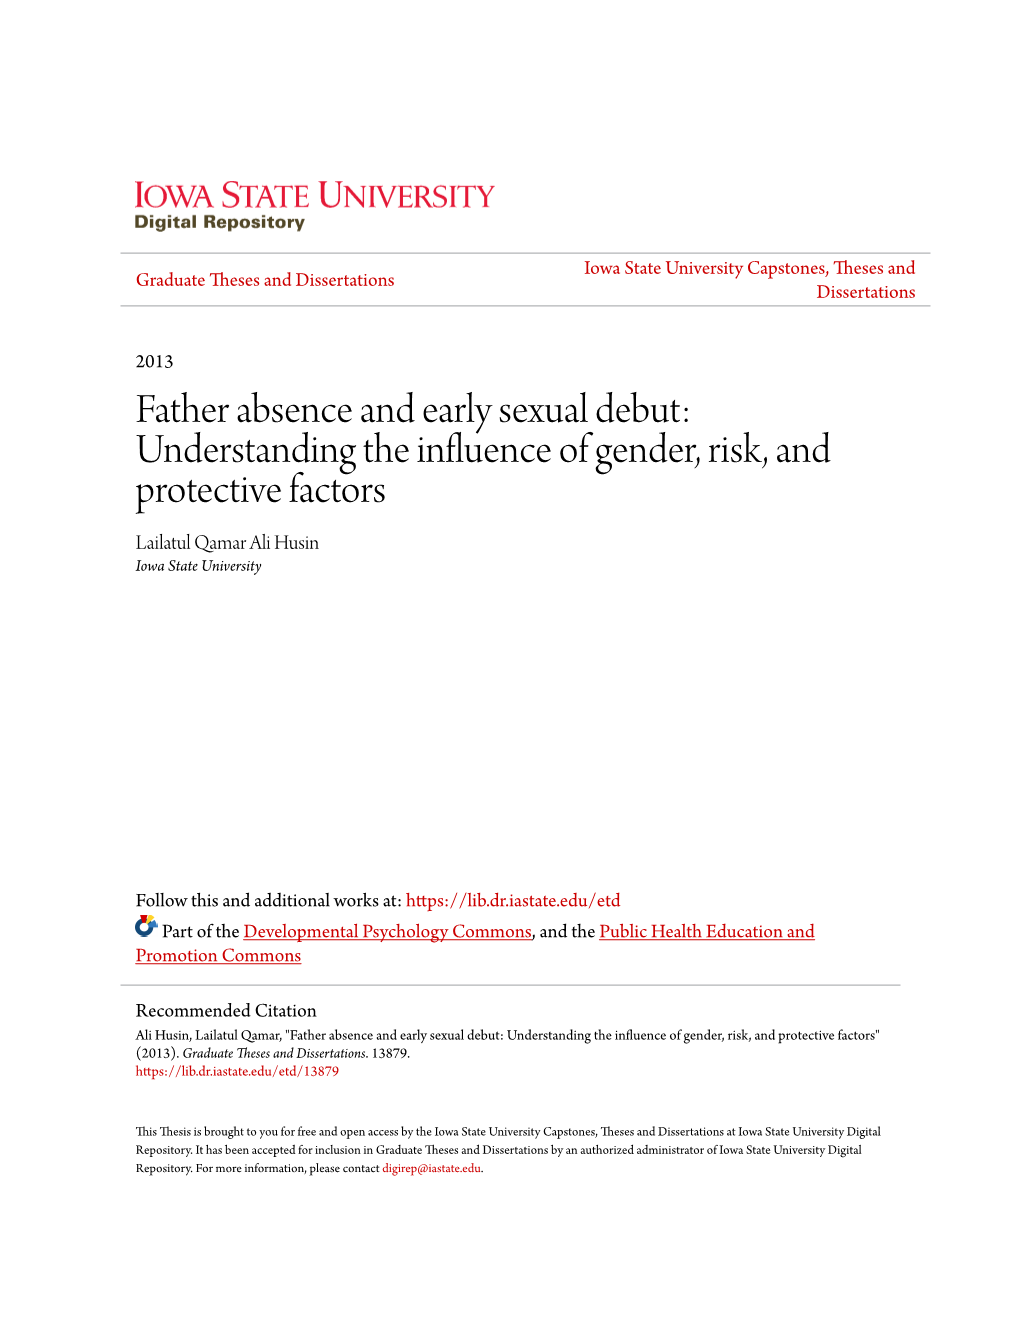 Father Absence and Early Sexual Debut: Understanding the Influence of Gender, Risk, and Protective Factors Lailatul Qamar Ali Husin Iowa State University